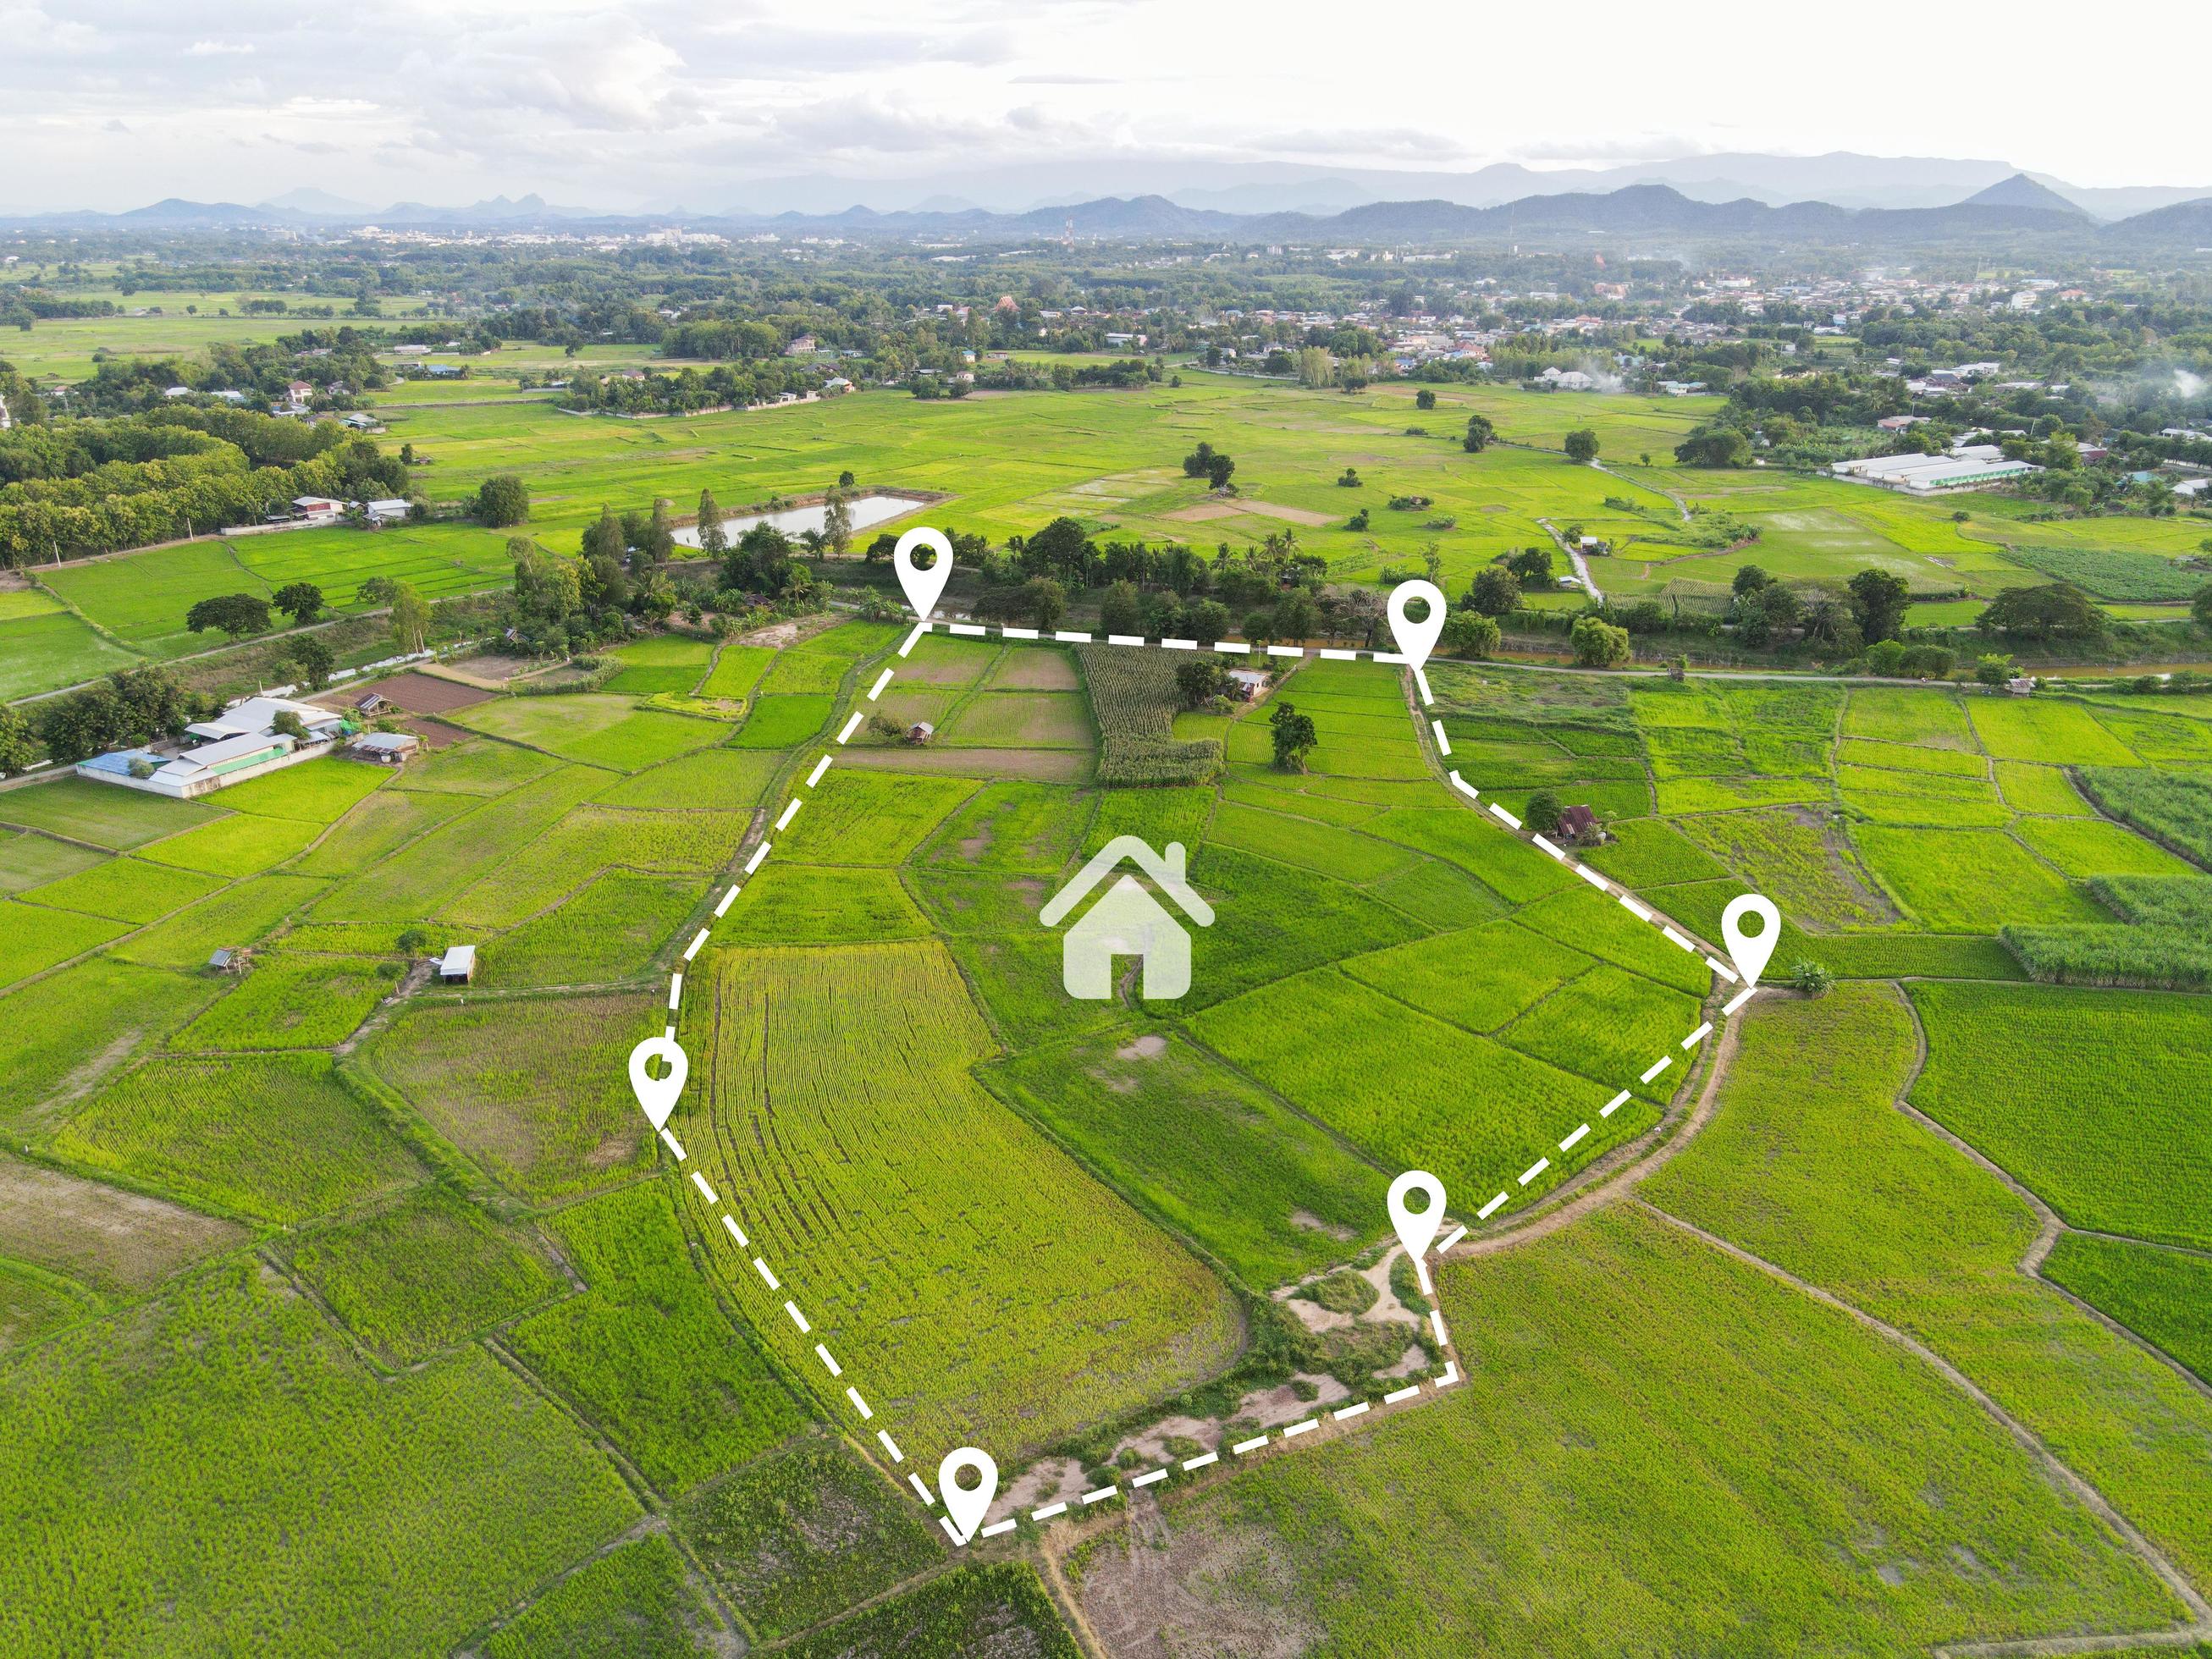 https://static.vecteezy.com/system/resources/previews/014/943/901/large_2x/land-plot-for-building-house-aerial-view-land-field-with-pins-pin-location-for-housing-subdivision-residential-development-owned-sale-rent-buy-or-investment-home-or-house-expand-the-city-suburb-free-photo.JPG